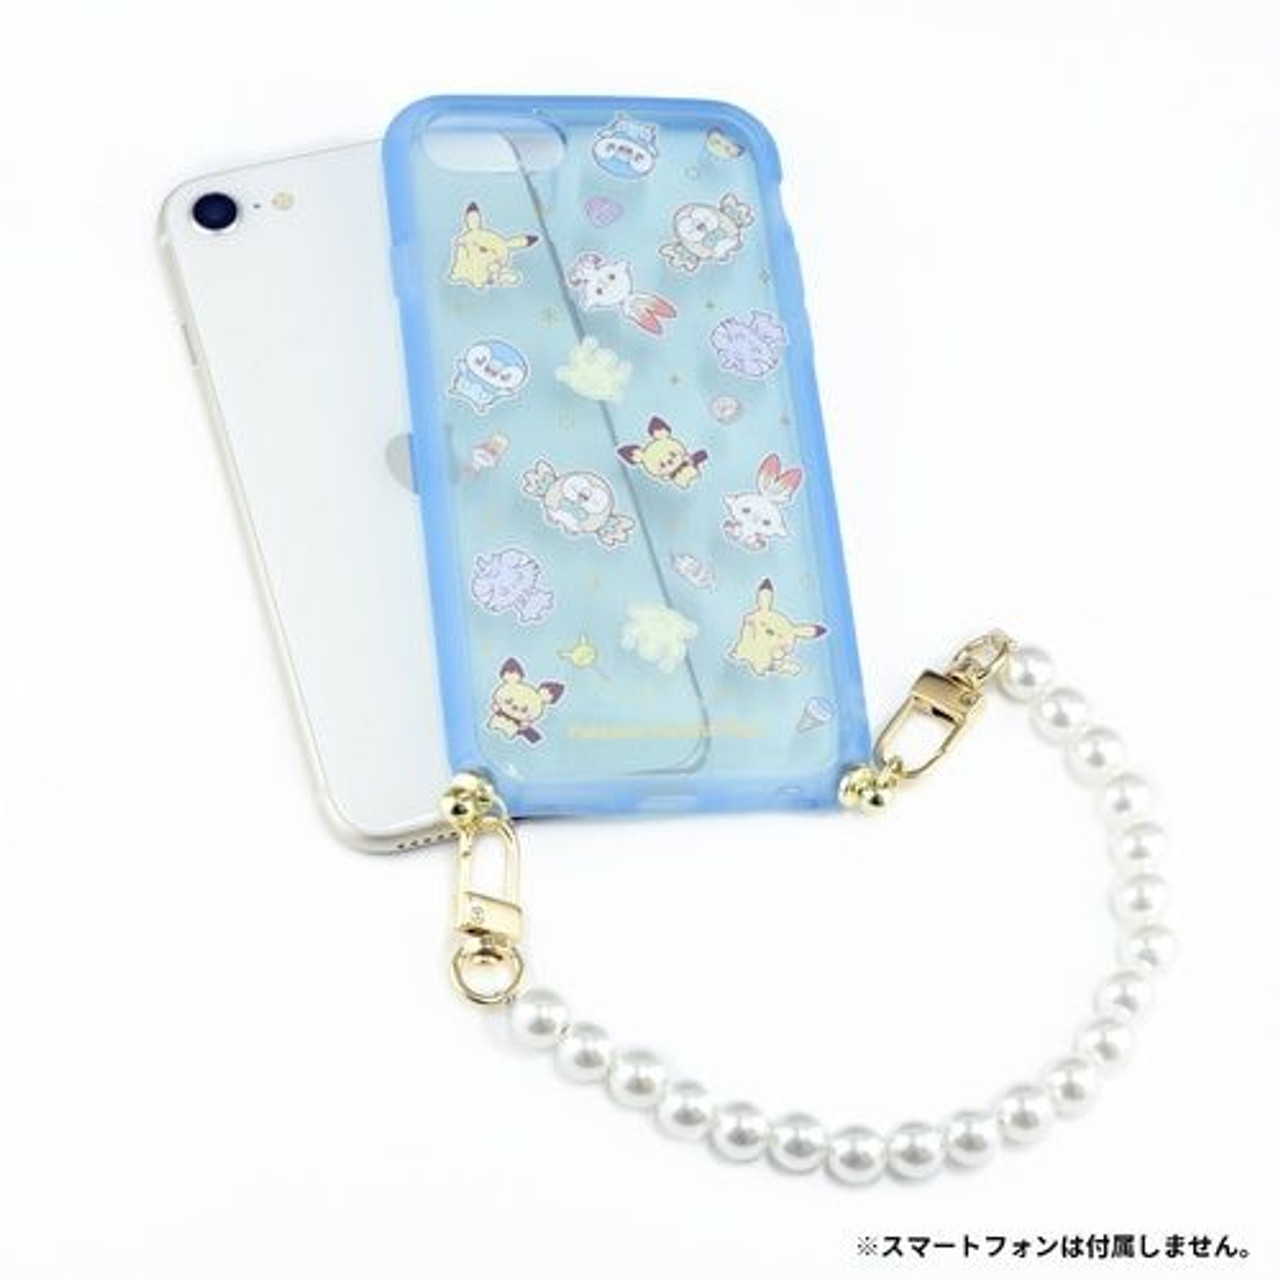 for Strap with PokePeace Pearl - iPhone SE Case gen.)/8/7/6s/6 IIIIfit Everybody (3rd/2nd